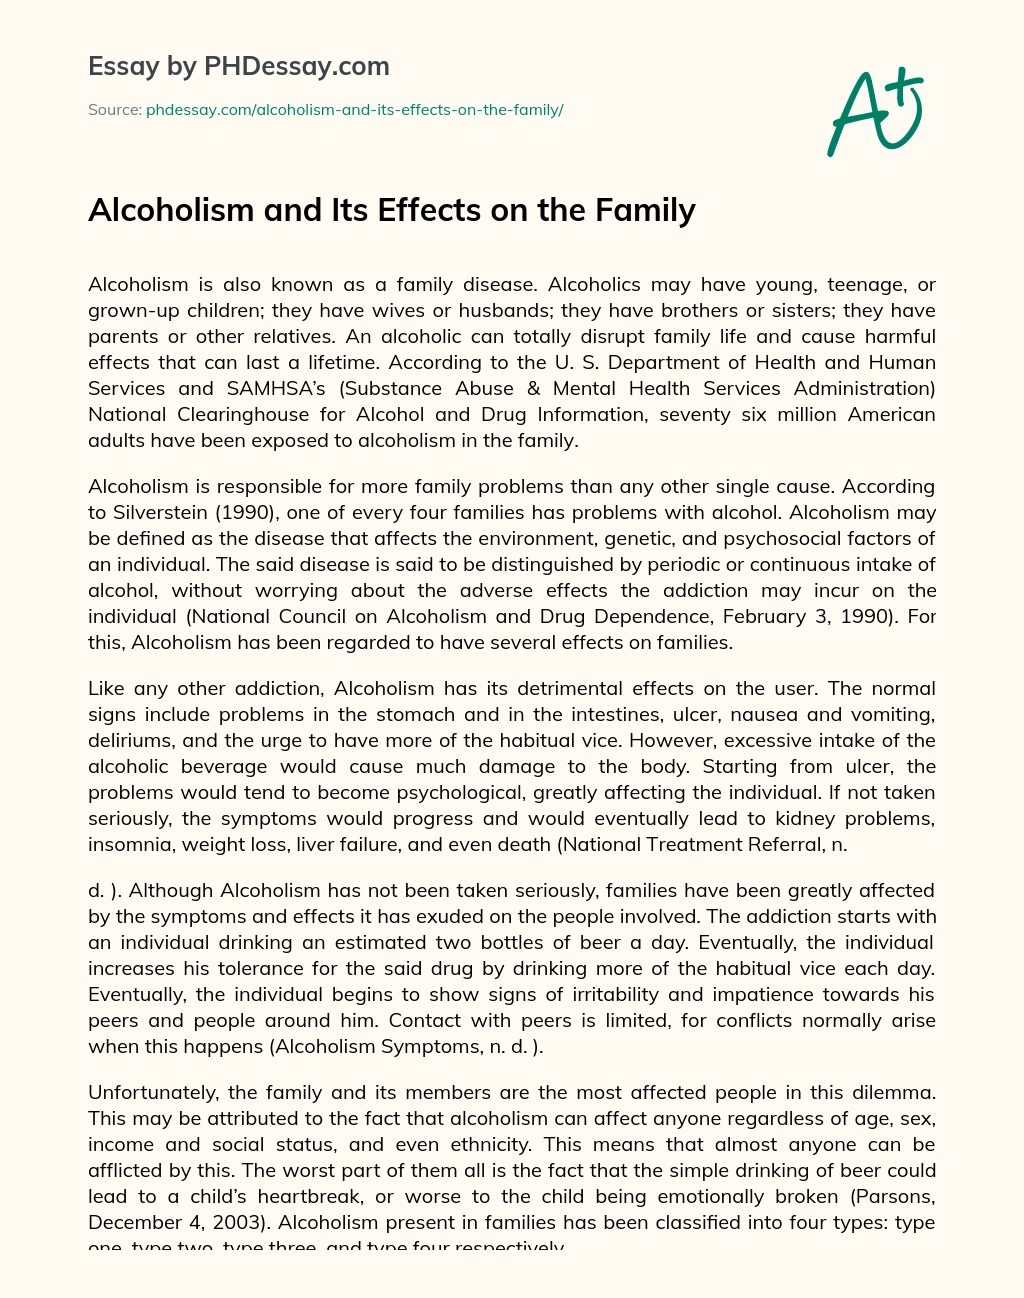 alcoholism affects family essay